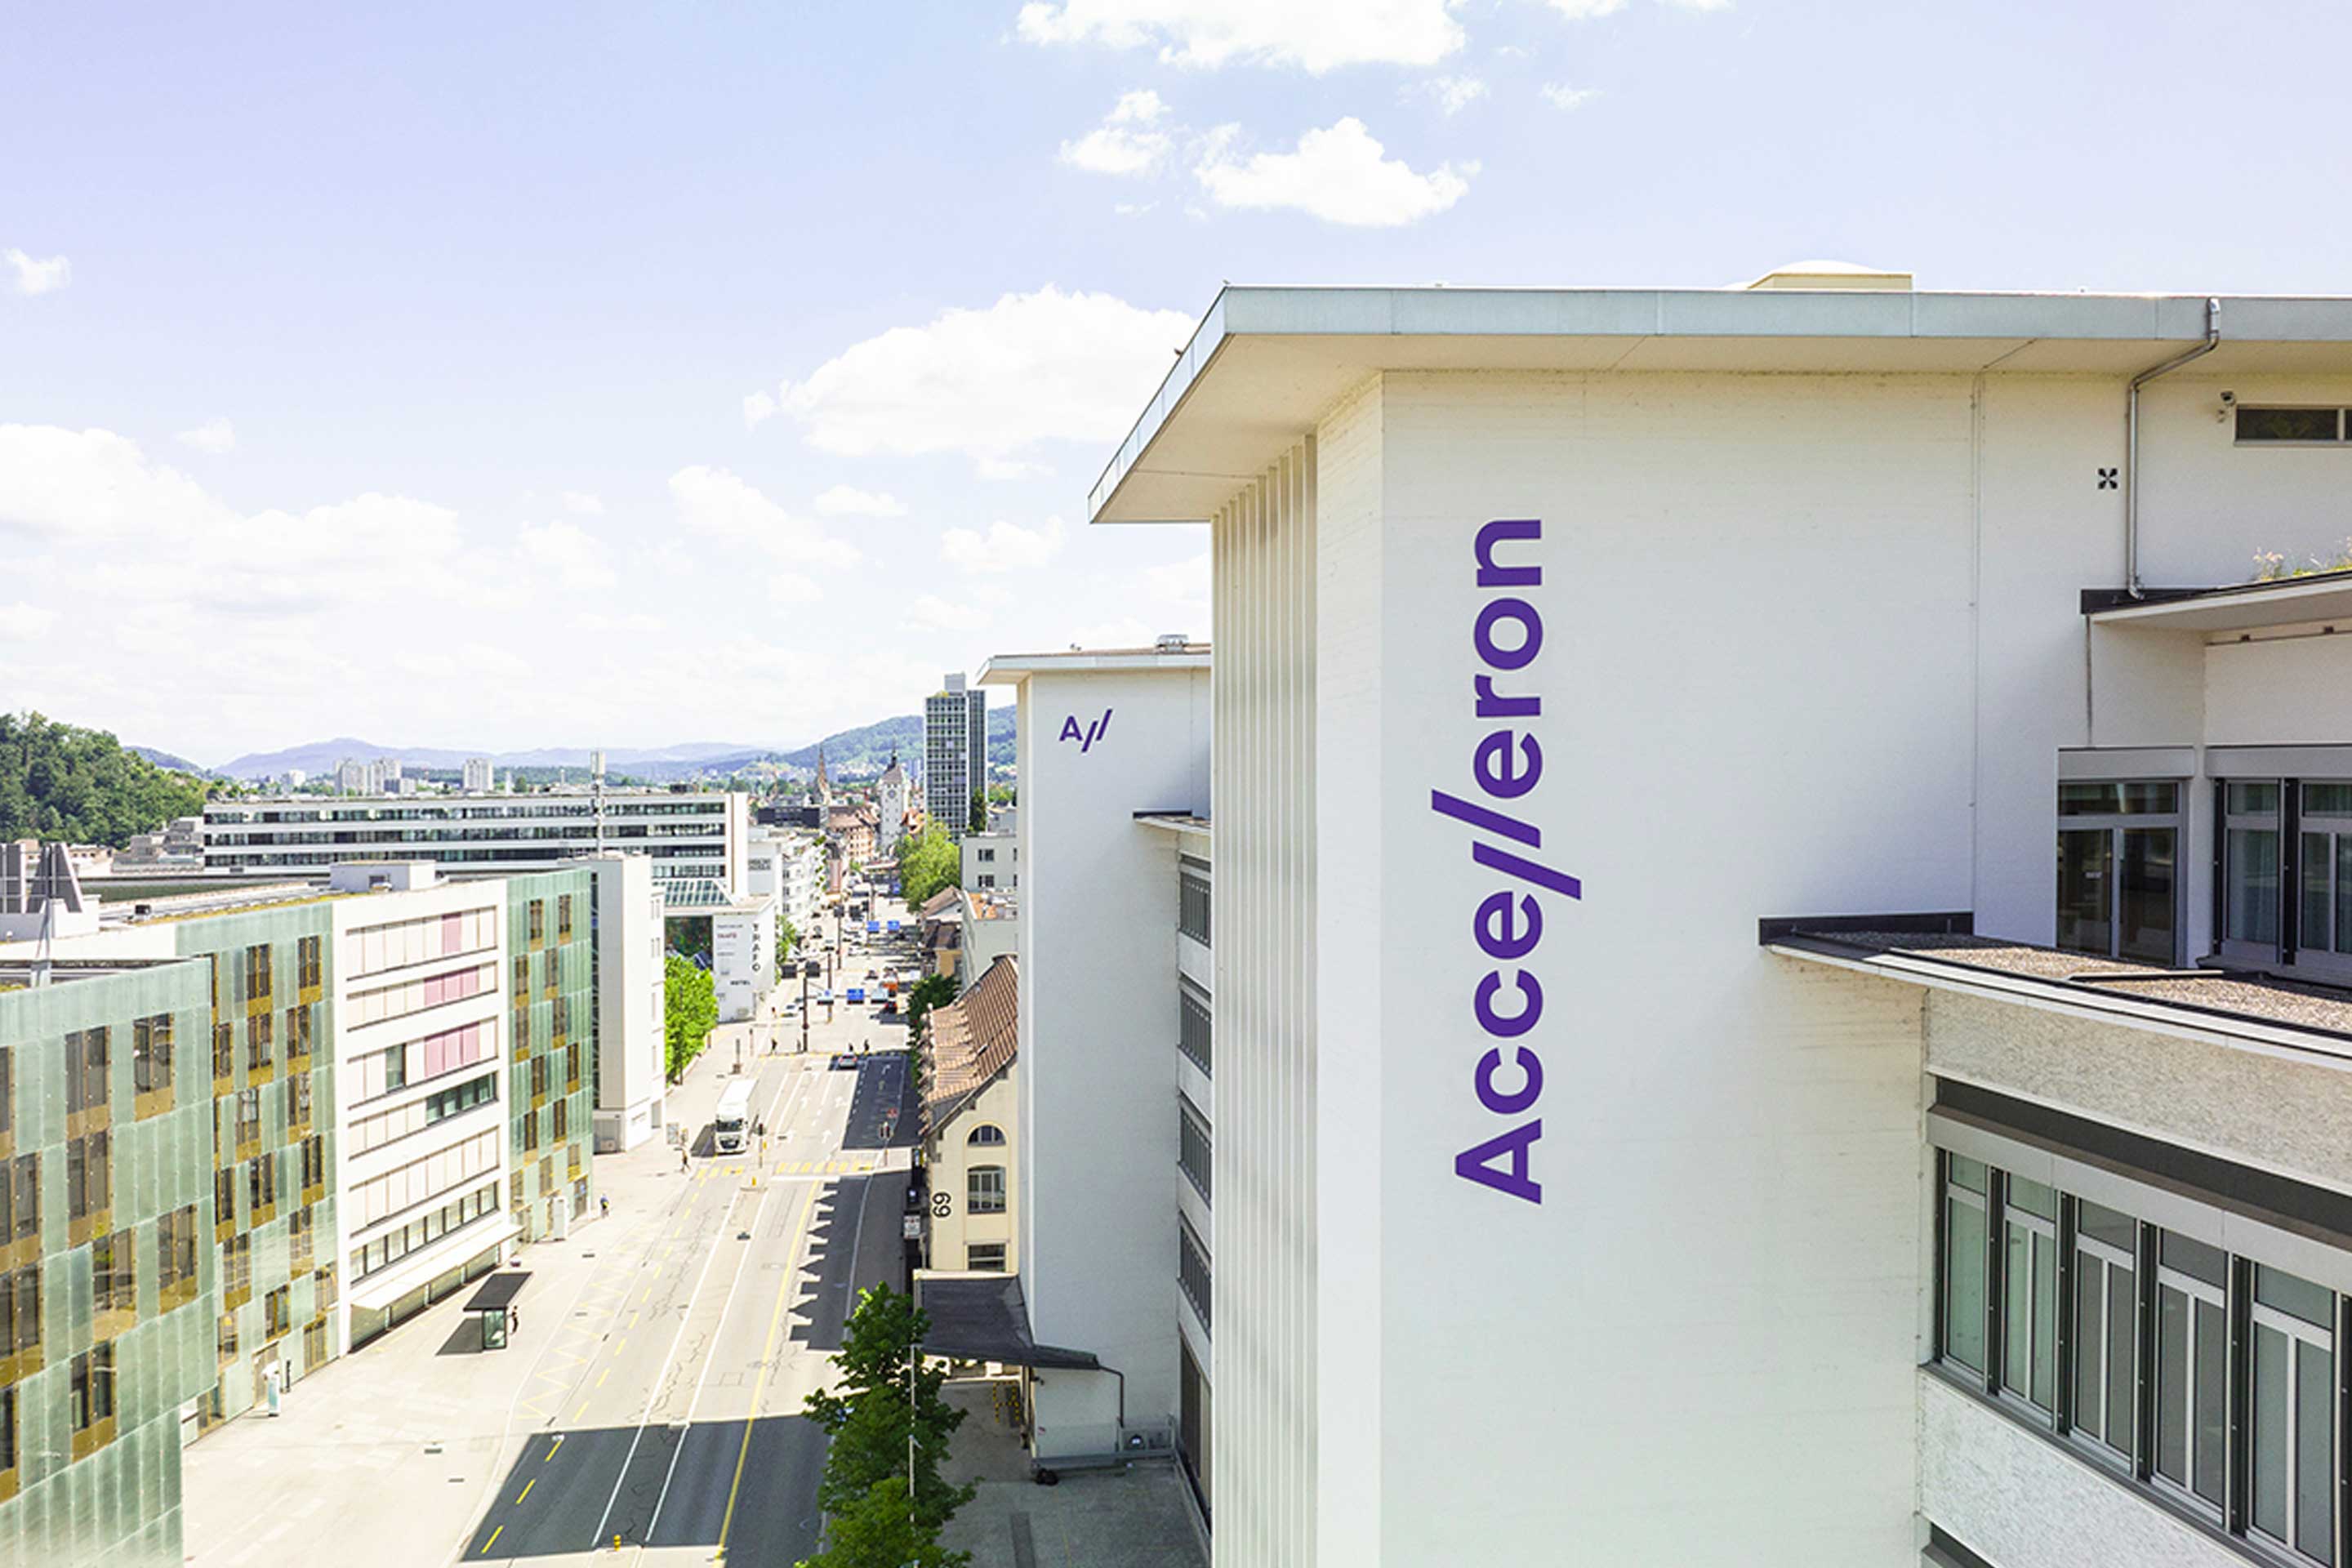 The new Accelleron logo and name on the side of Accelleron offices